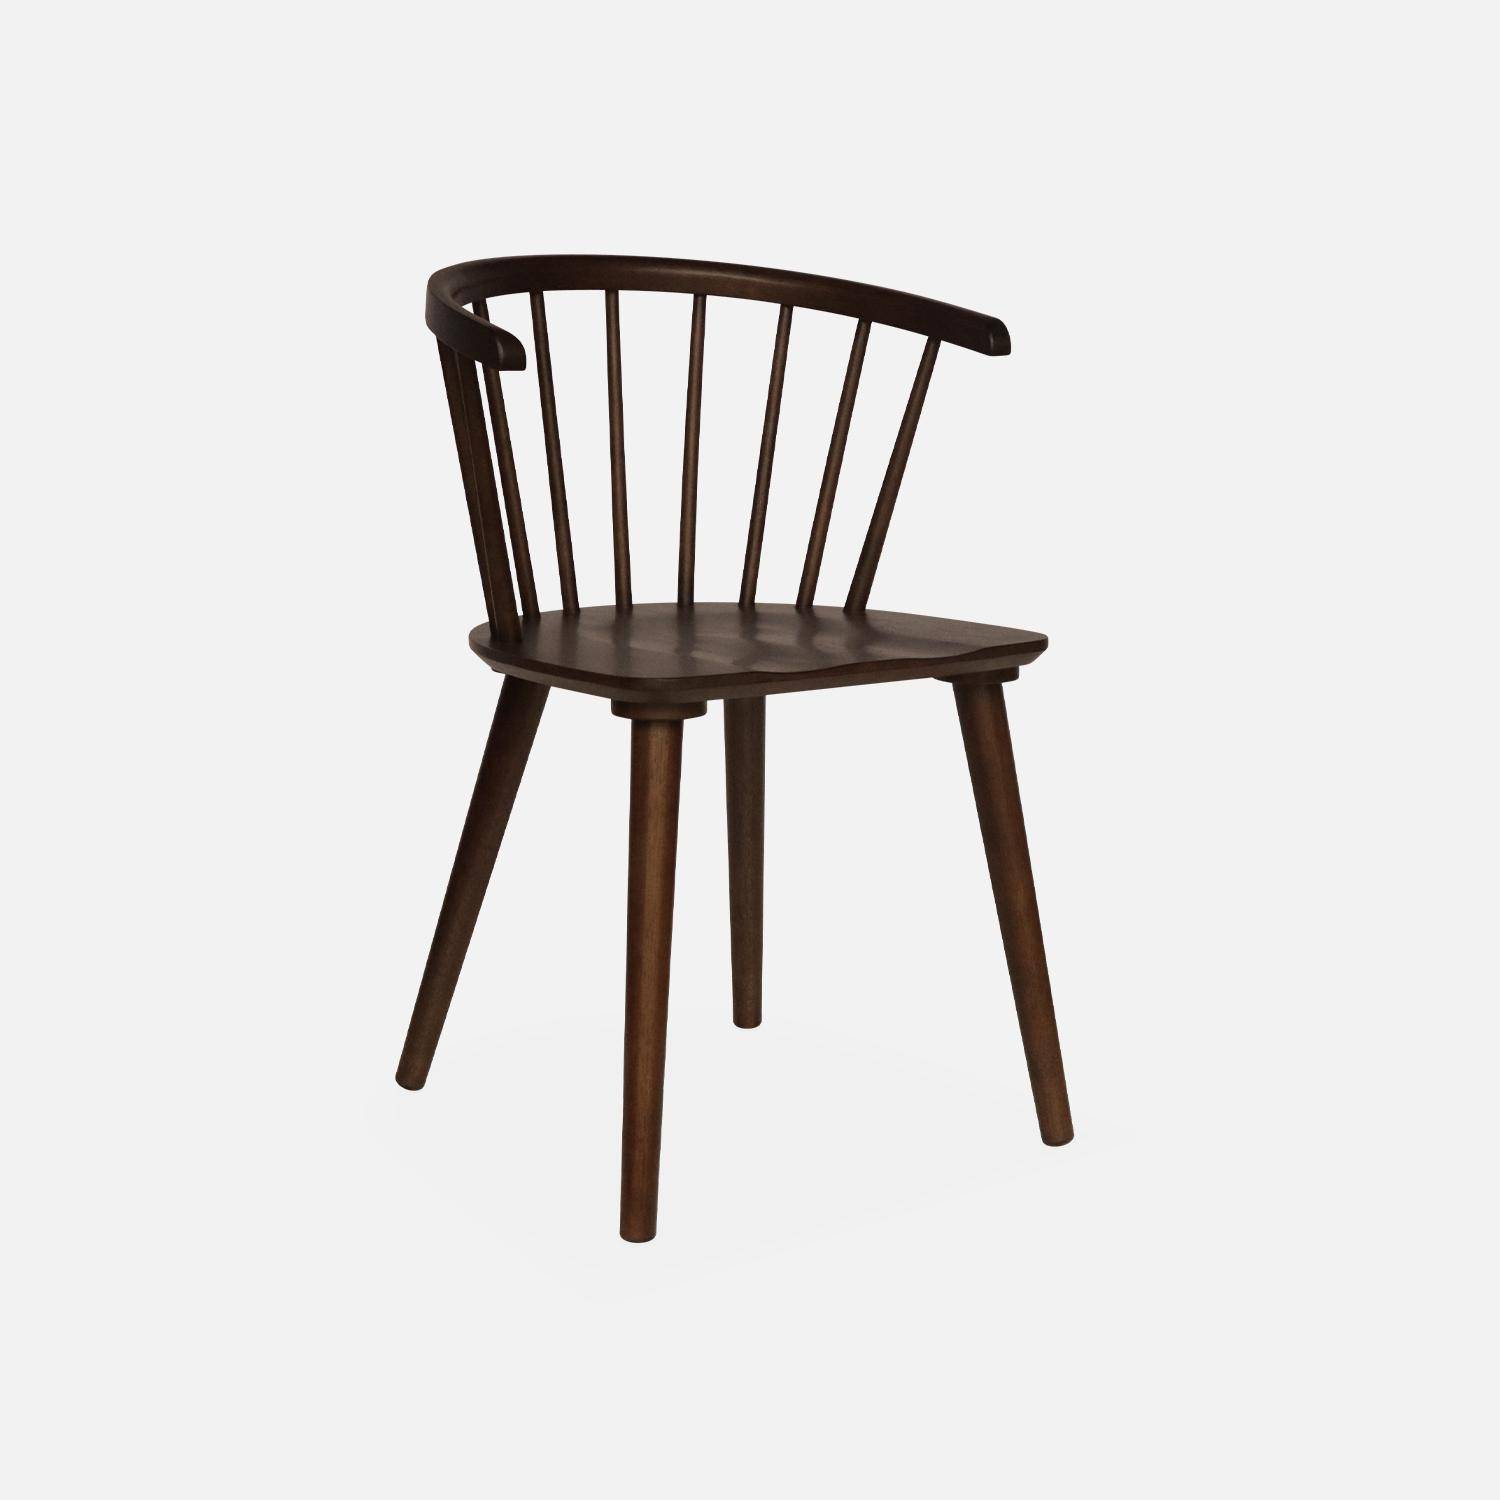 Pair of Wood and Plywood Spindle Chairs, dark wood, L53 x W47.5 x H76cm Photo4